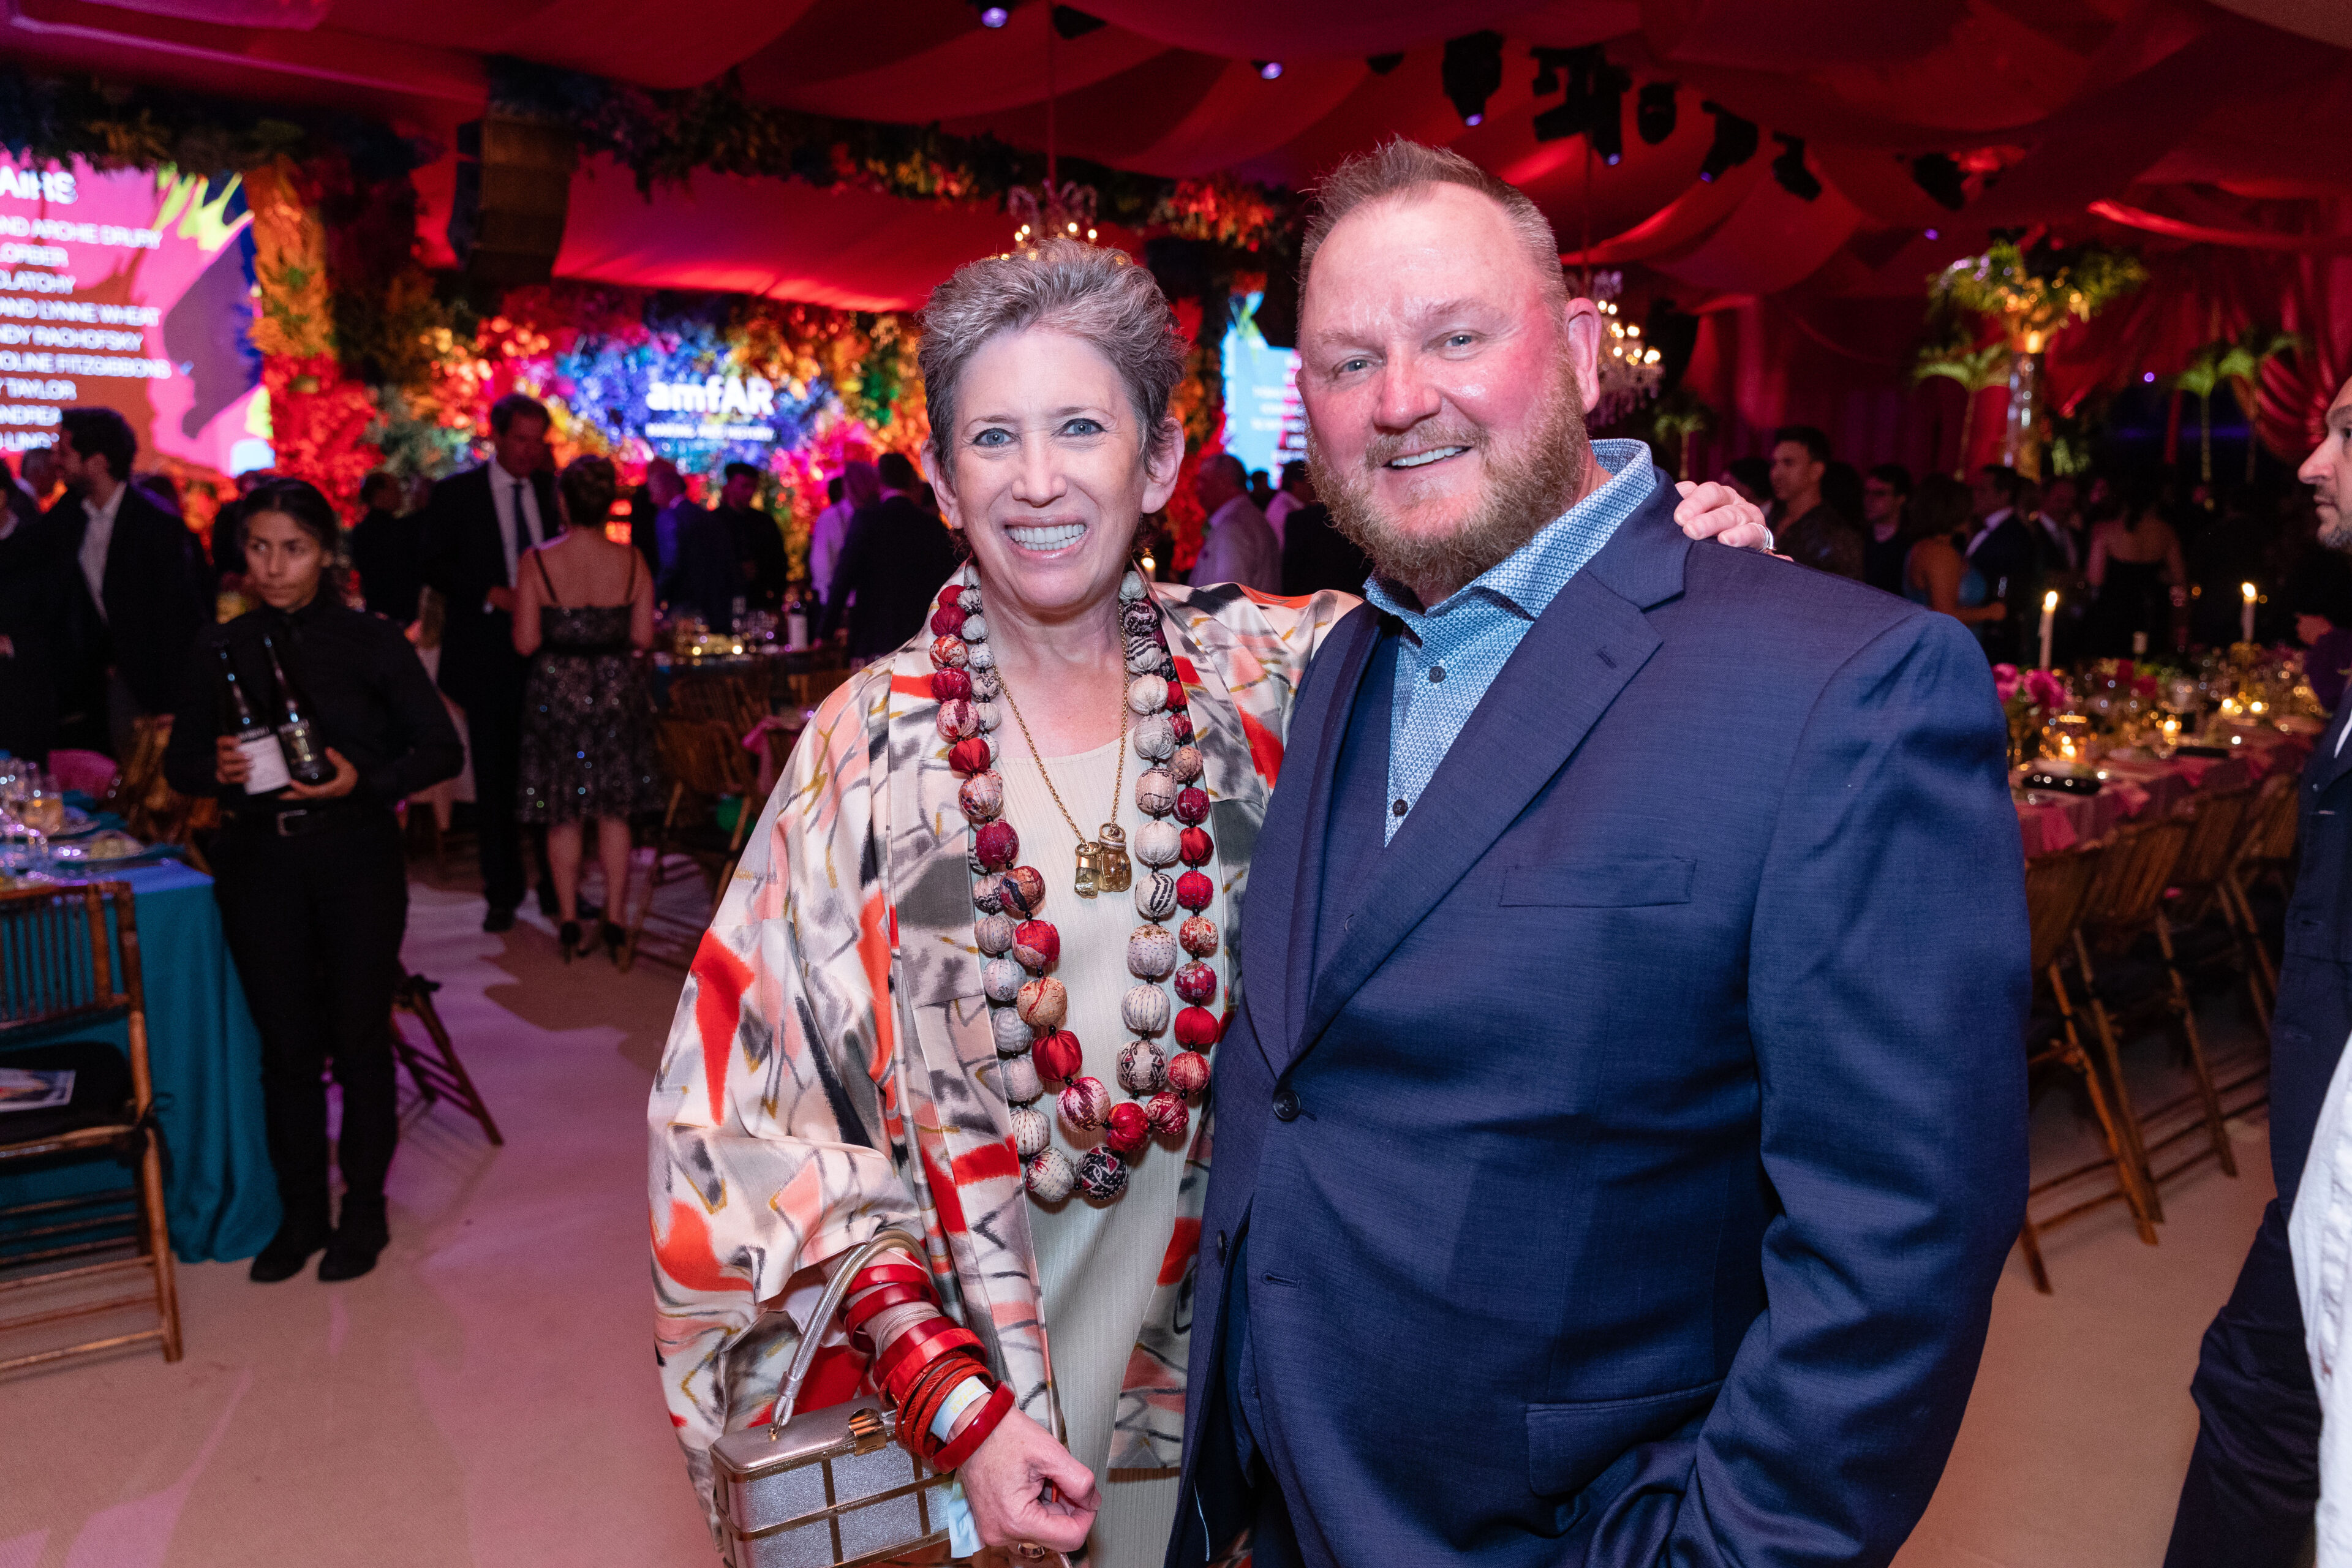 Beth deWoody and amfAR CEO Kevin Robert Frost